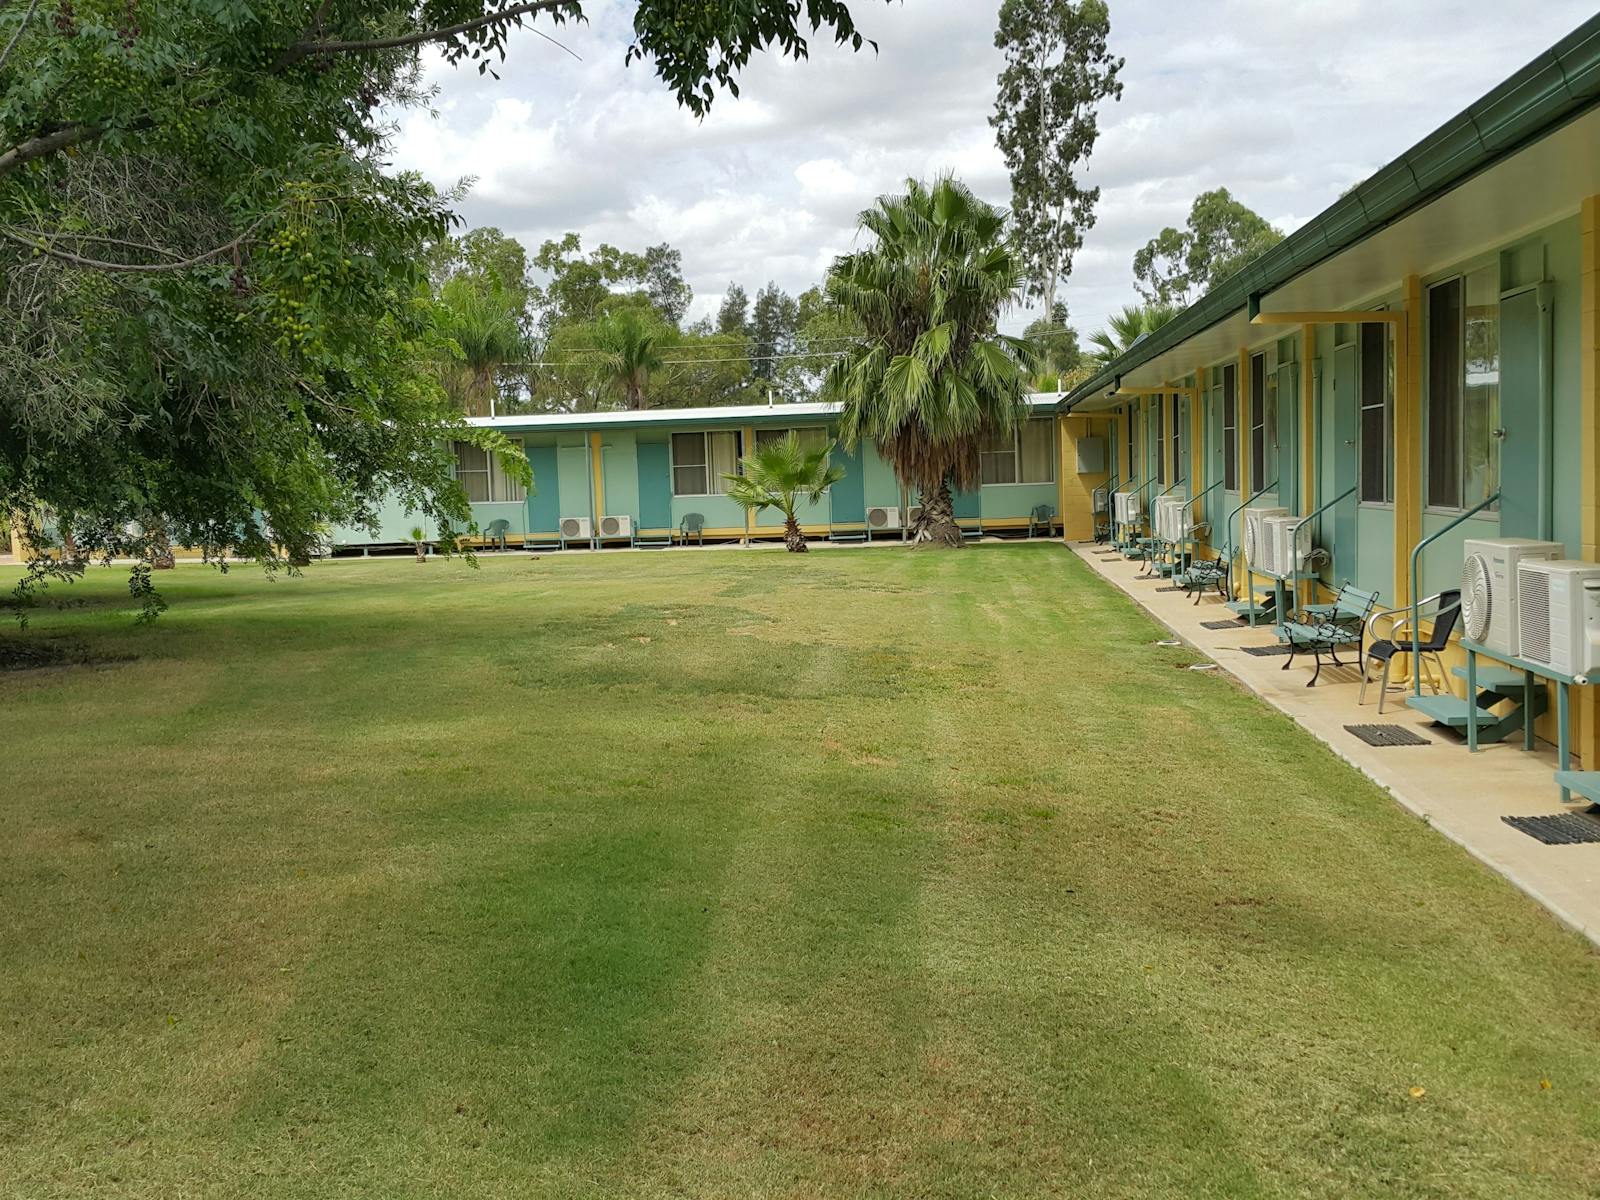 Motel Carnarvon has lots of gardens and lawn areas